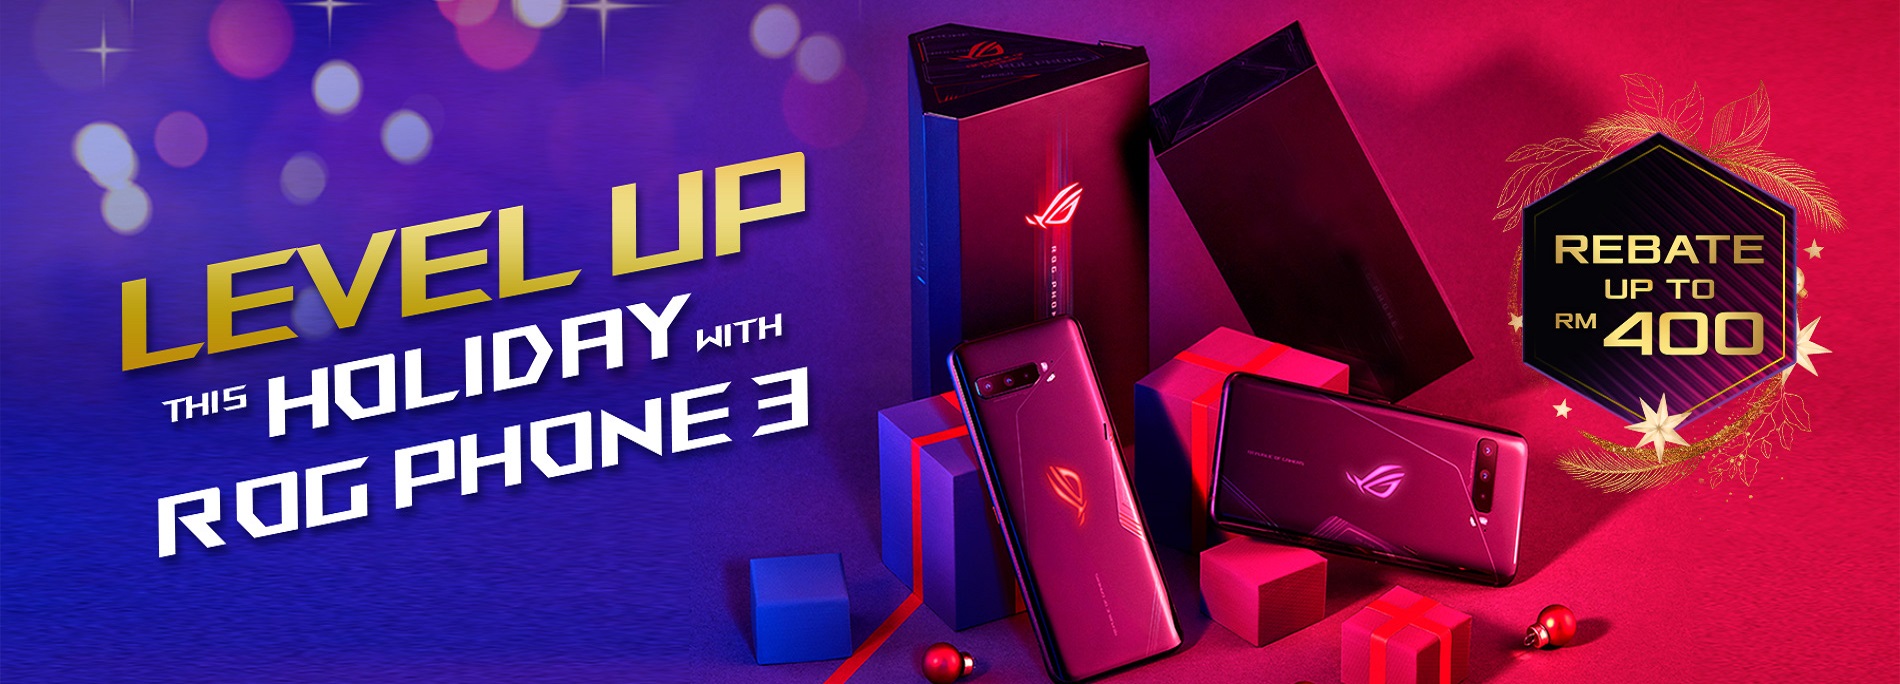 Level up this holiday with ROG Phone 3! Enjoy up to RM400 off on selected models.